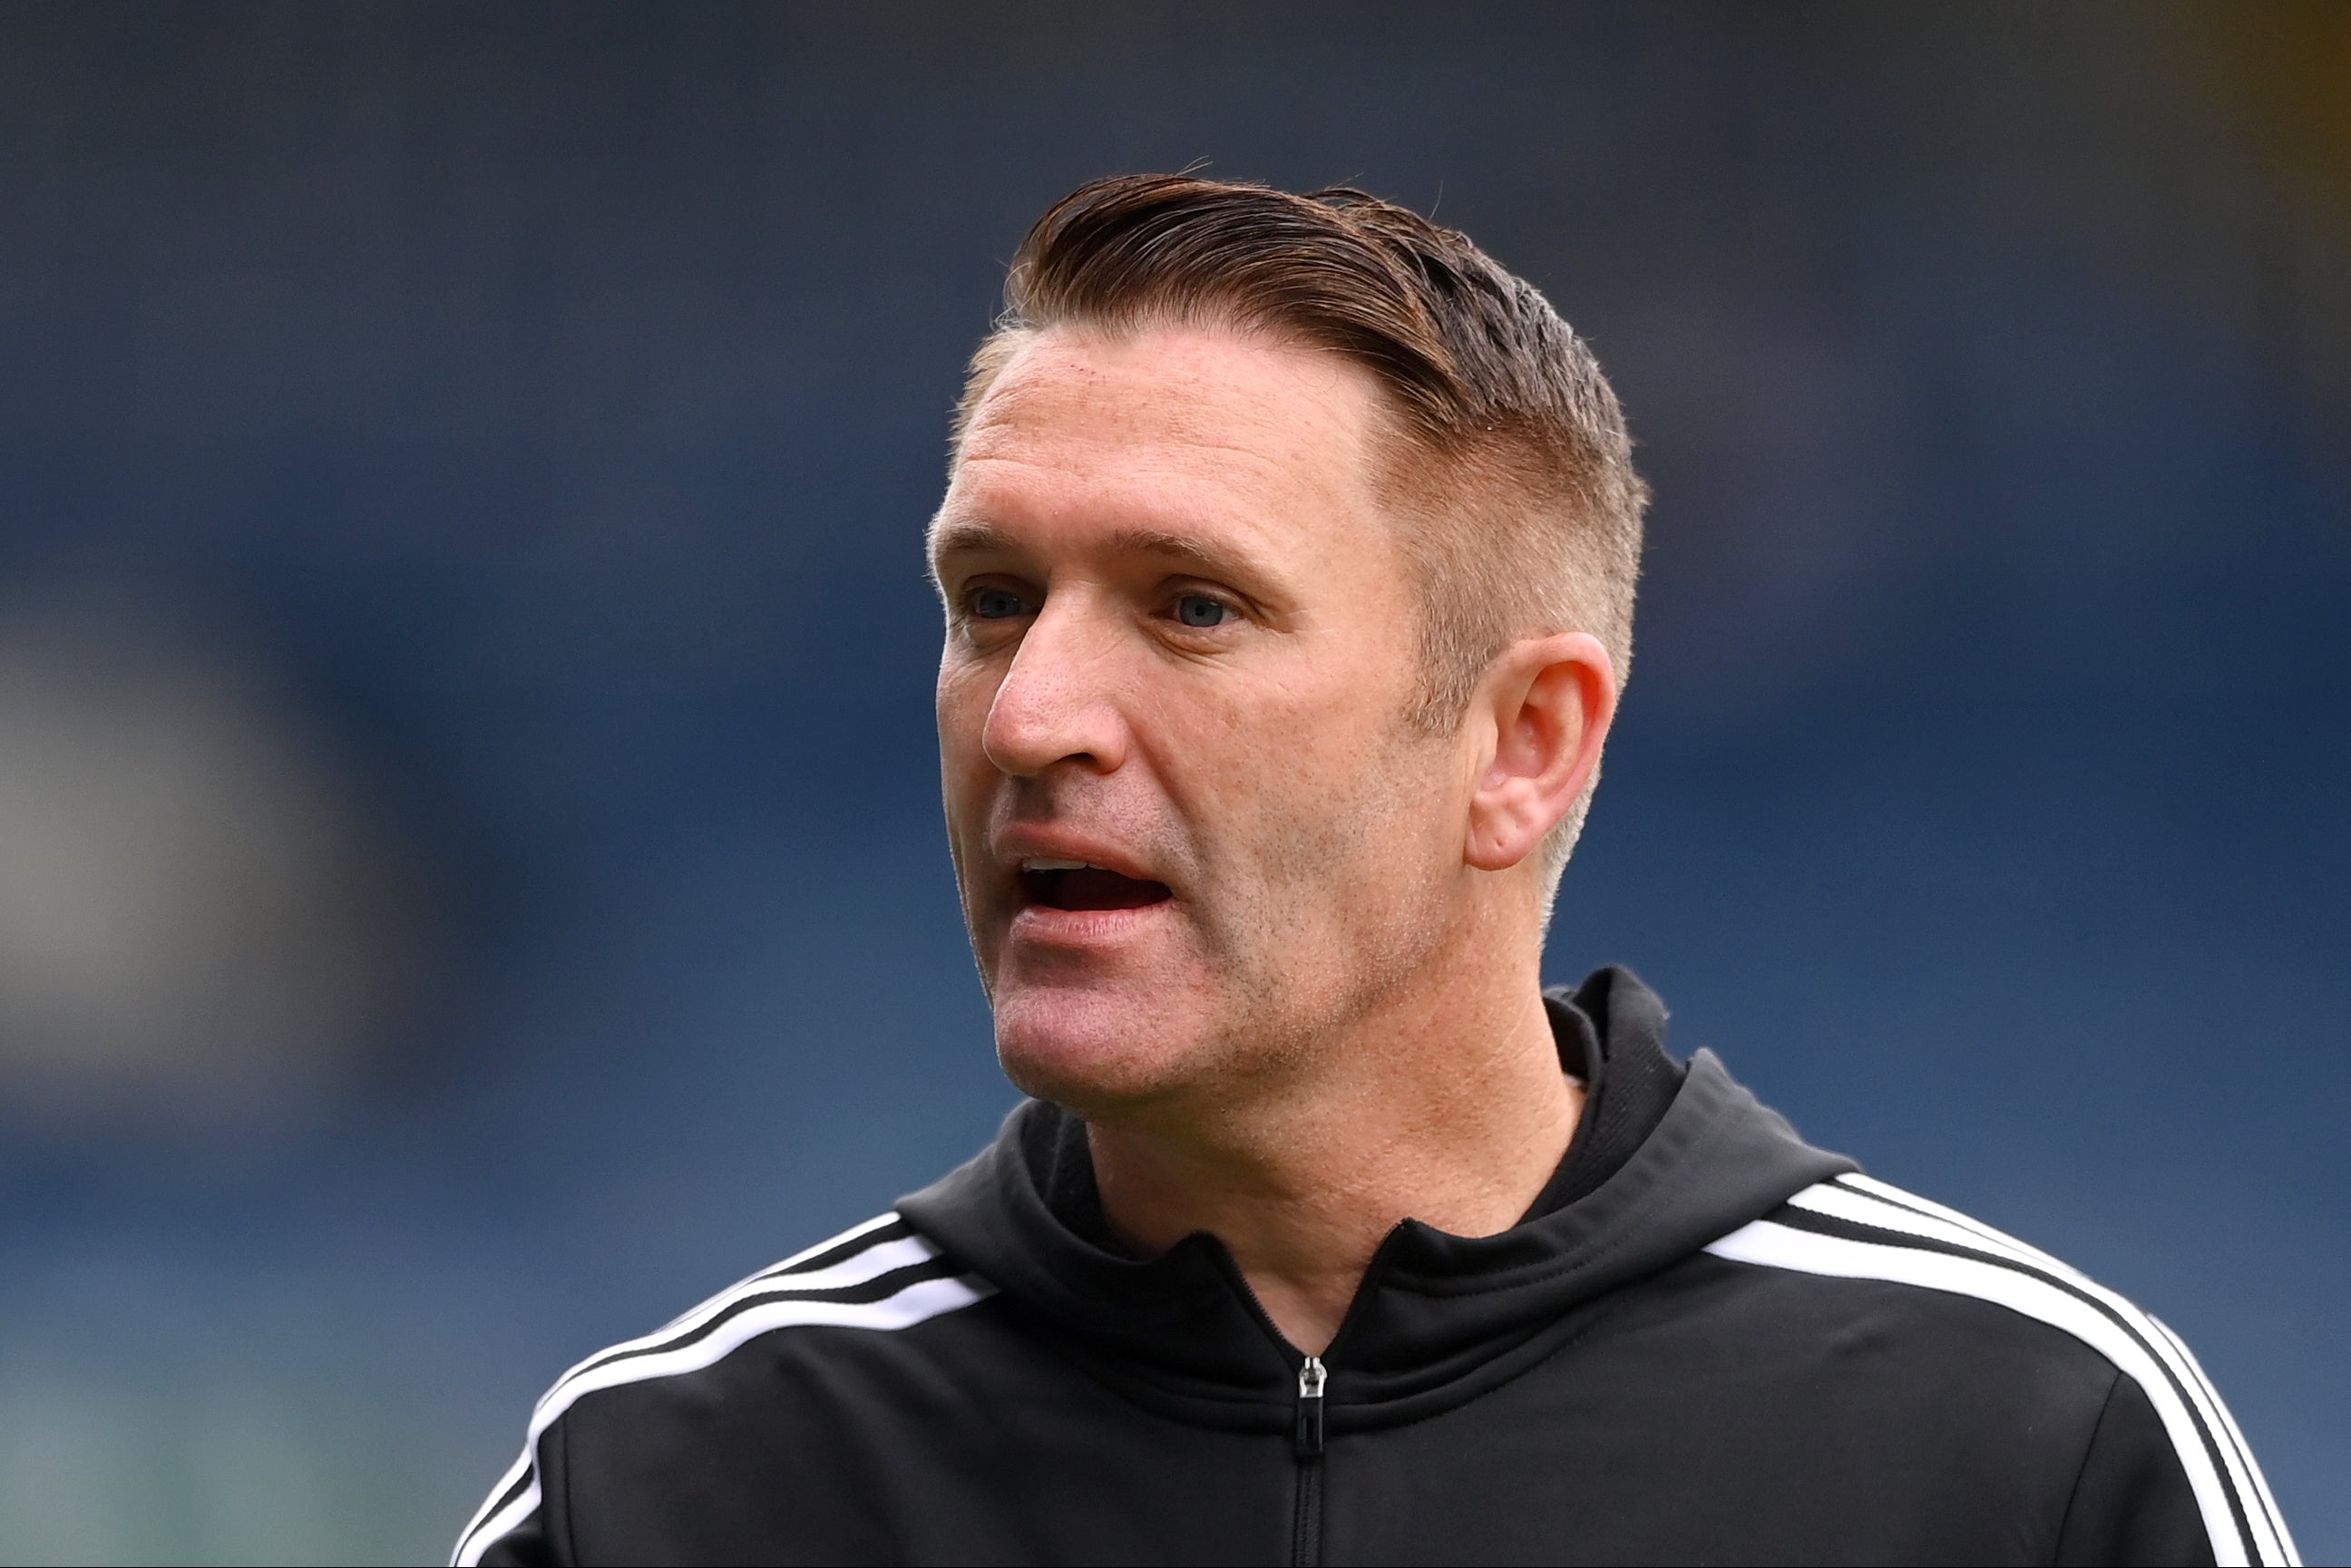 Robbie Keane became manager of Maccabi Tel Aviv over the summer